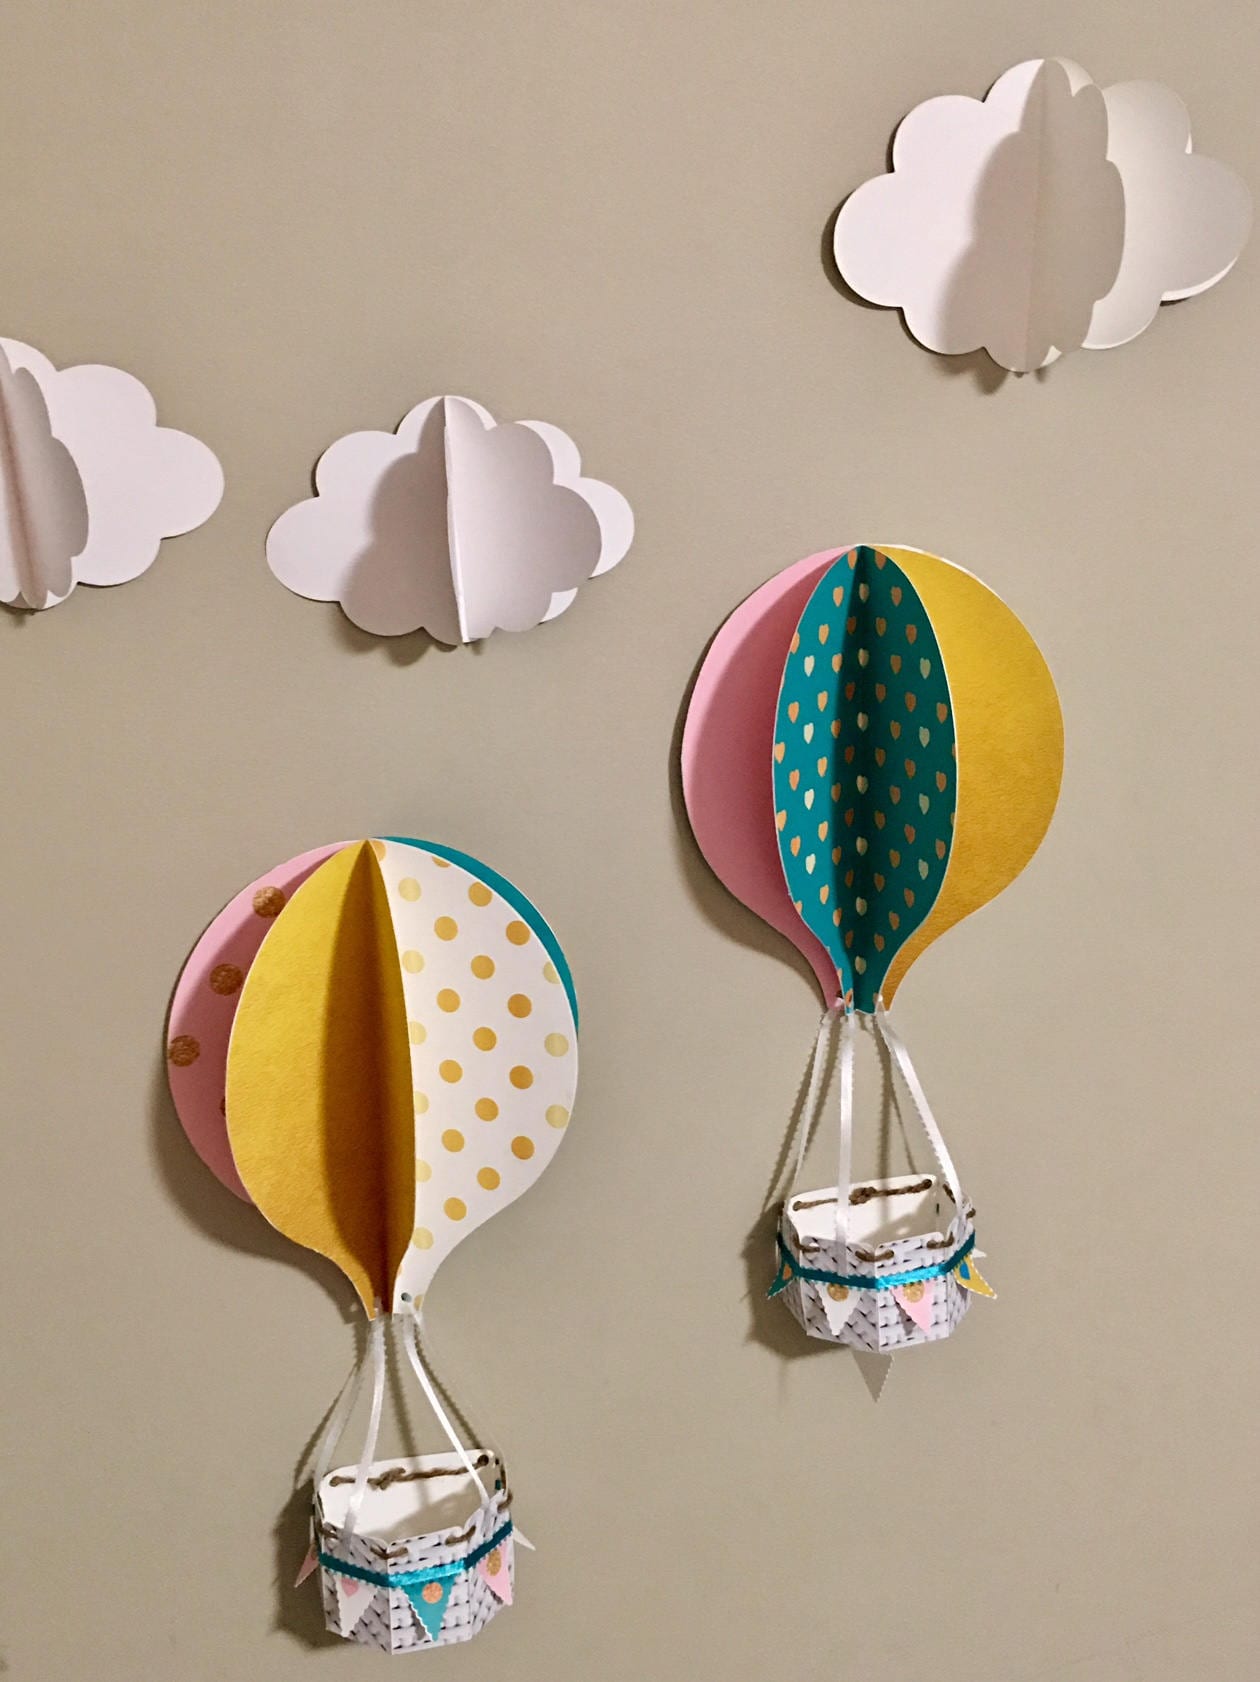 Hot air balloons/decoration/baby nursery/hanging or wall mounted - set of 2 balloons and clouds